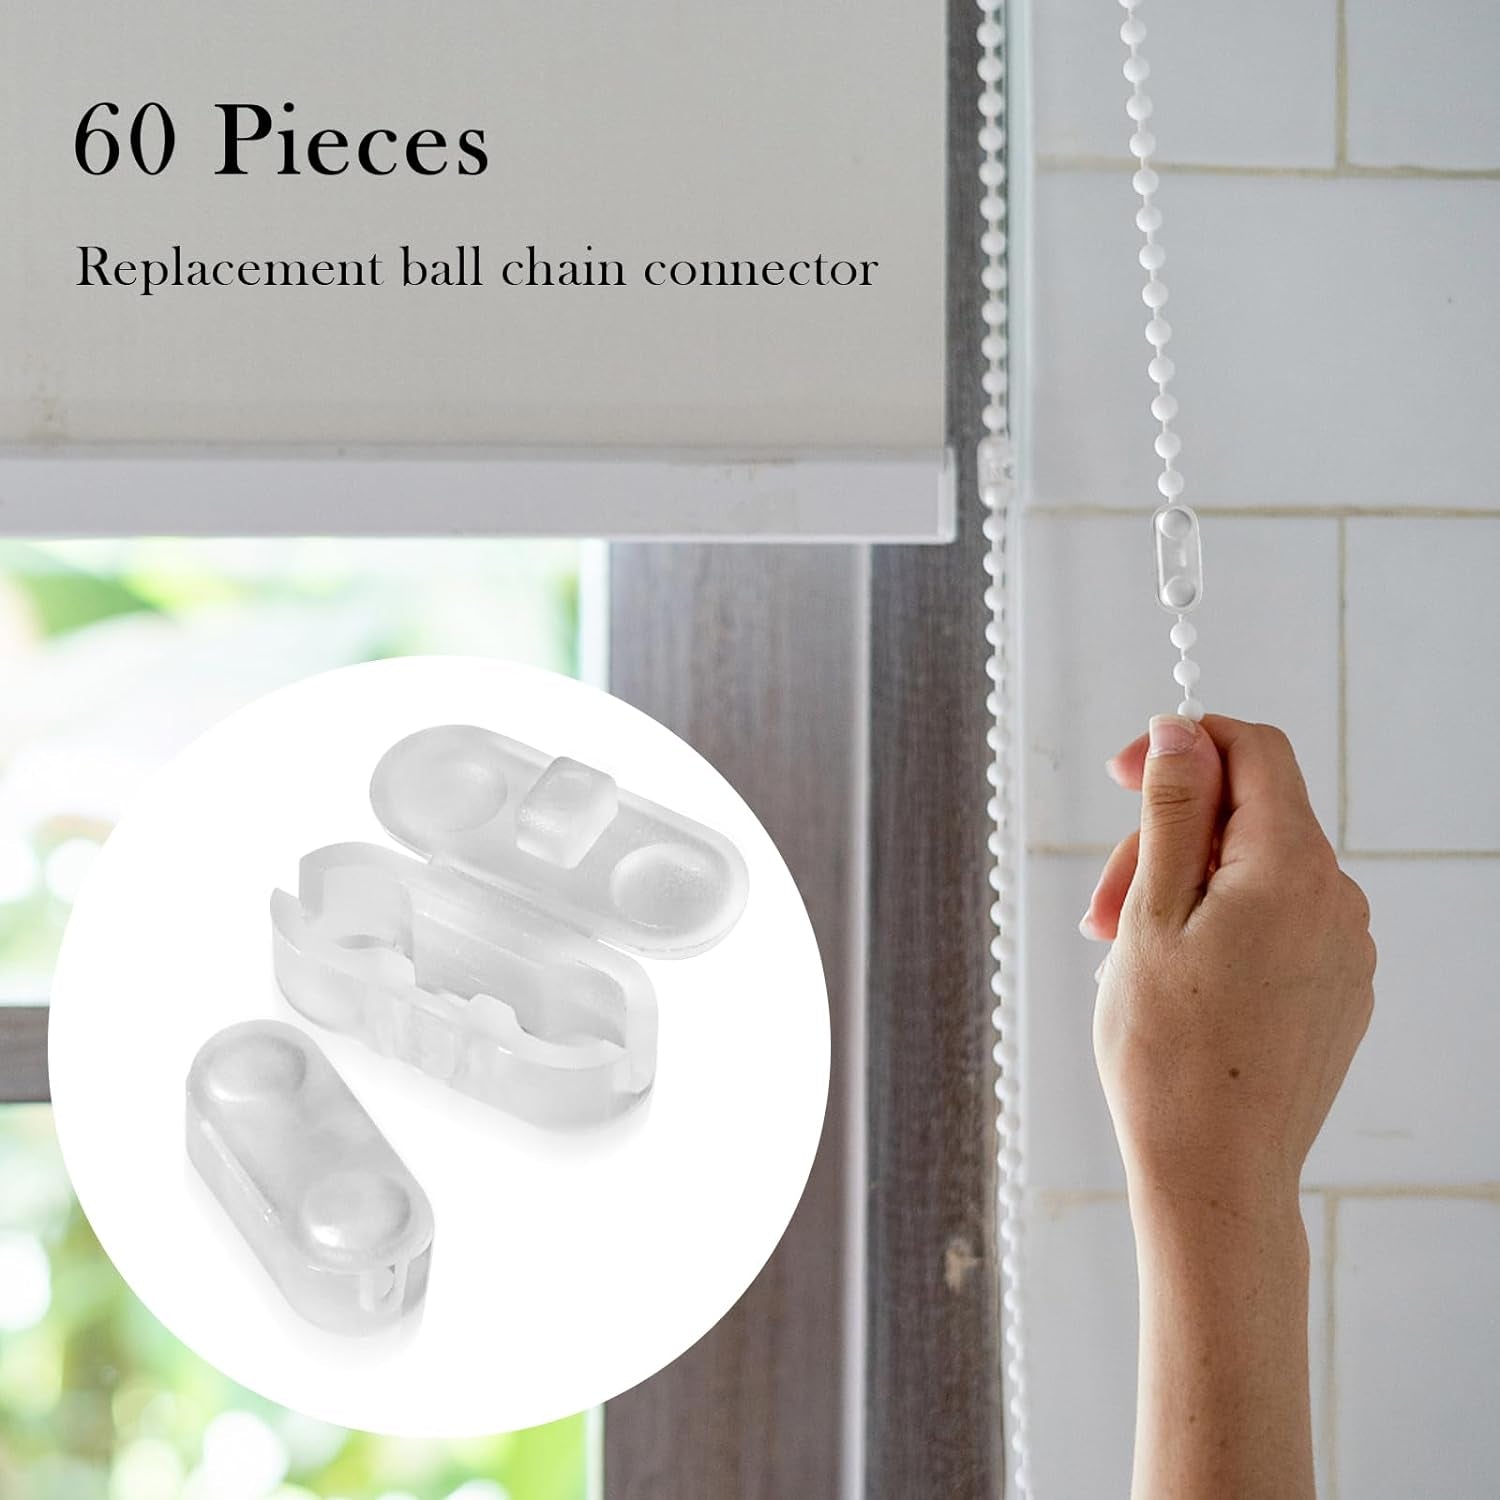 60Pcs Chain Connectors Roller Shade Bead Chain Connector, Beaded Chain for Roller Shades and Vertical Blinds, Vertical Roman Roller Blind Ball Chain Cord Connector Clips (Transparent)